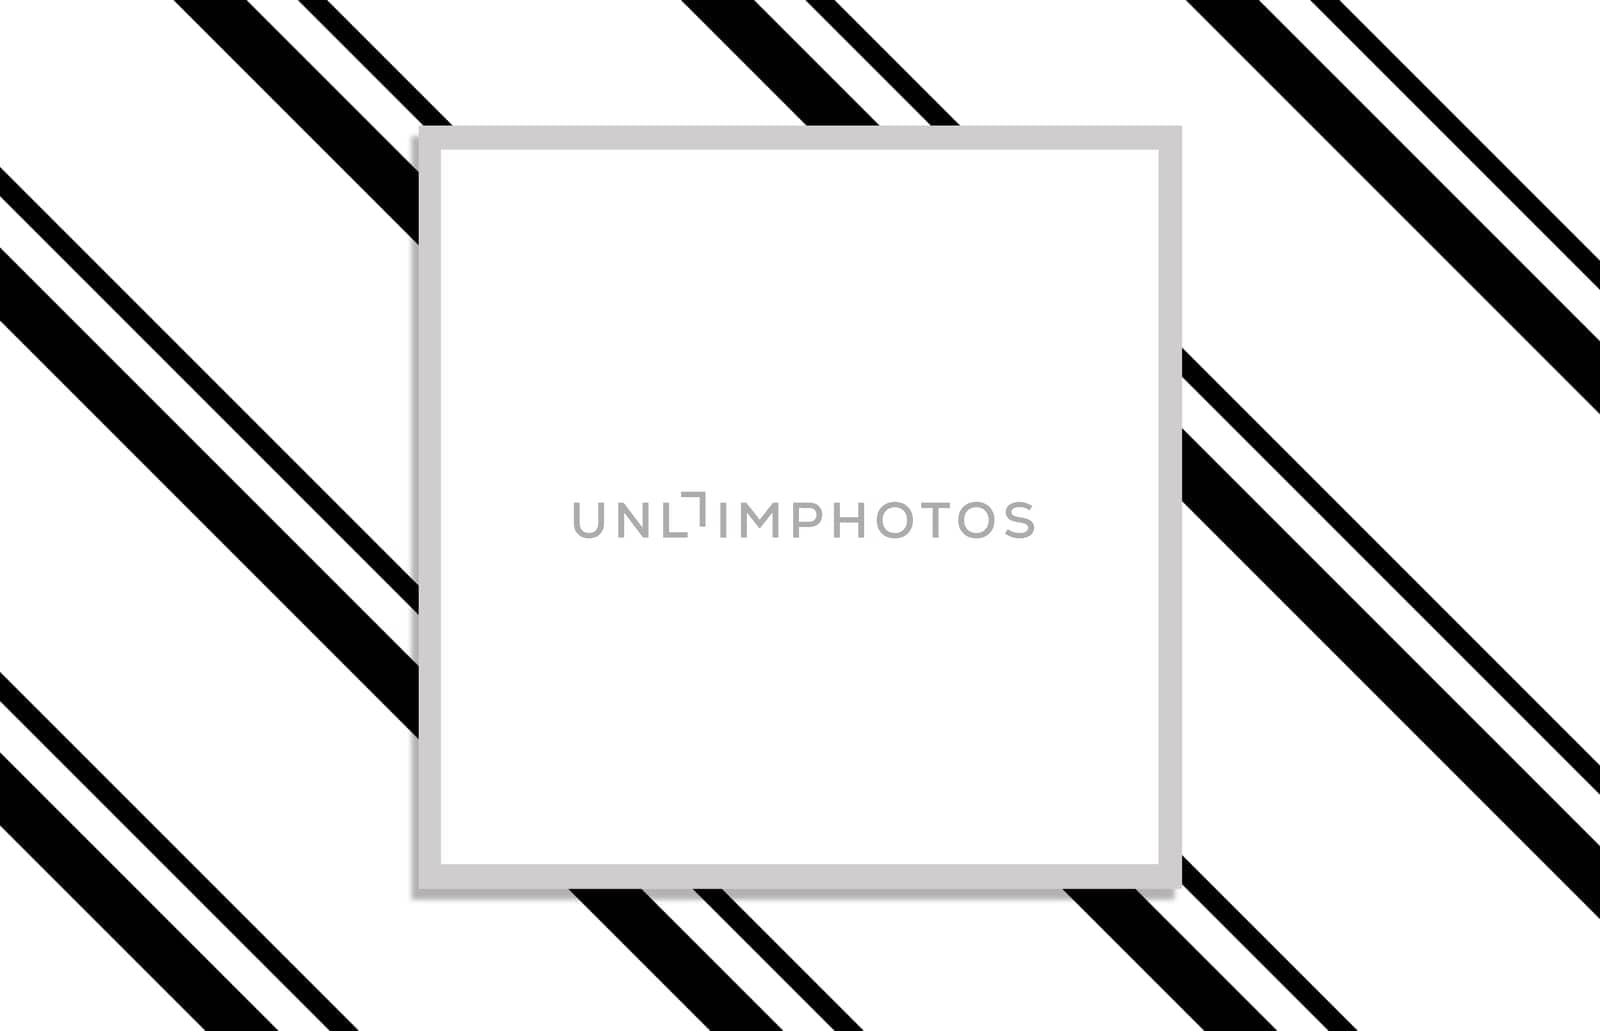 Pattern with white square and black lines on white background